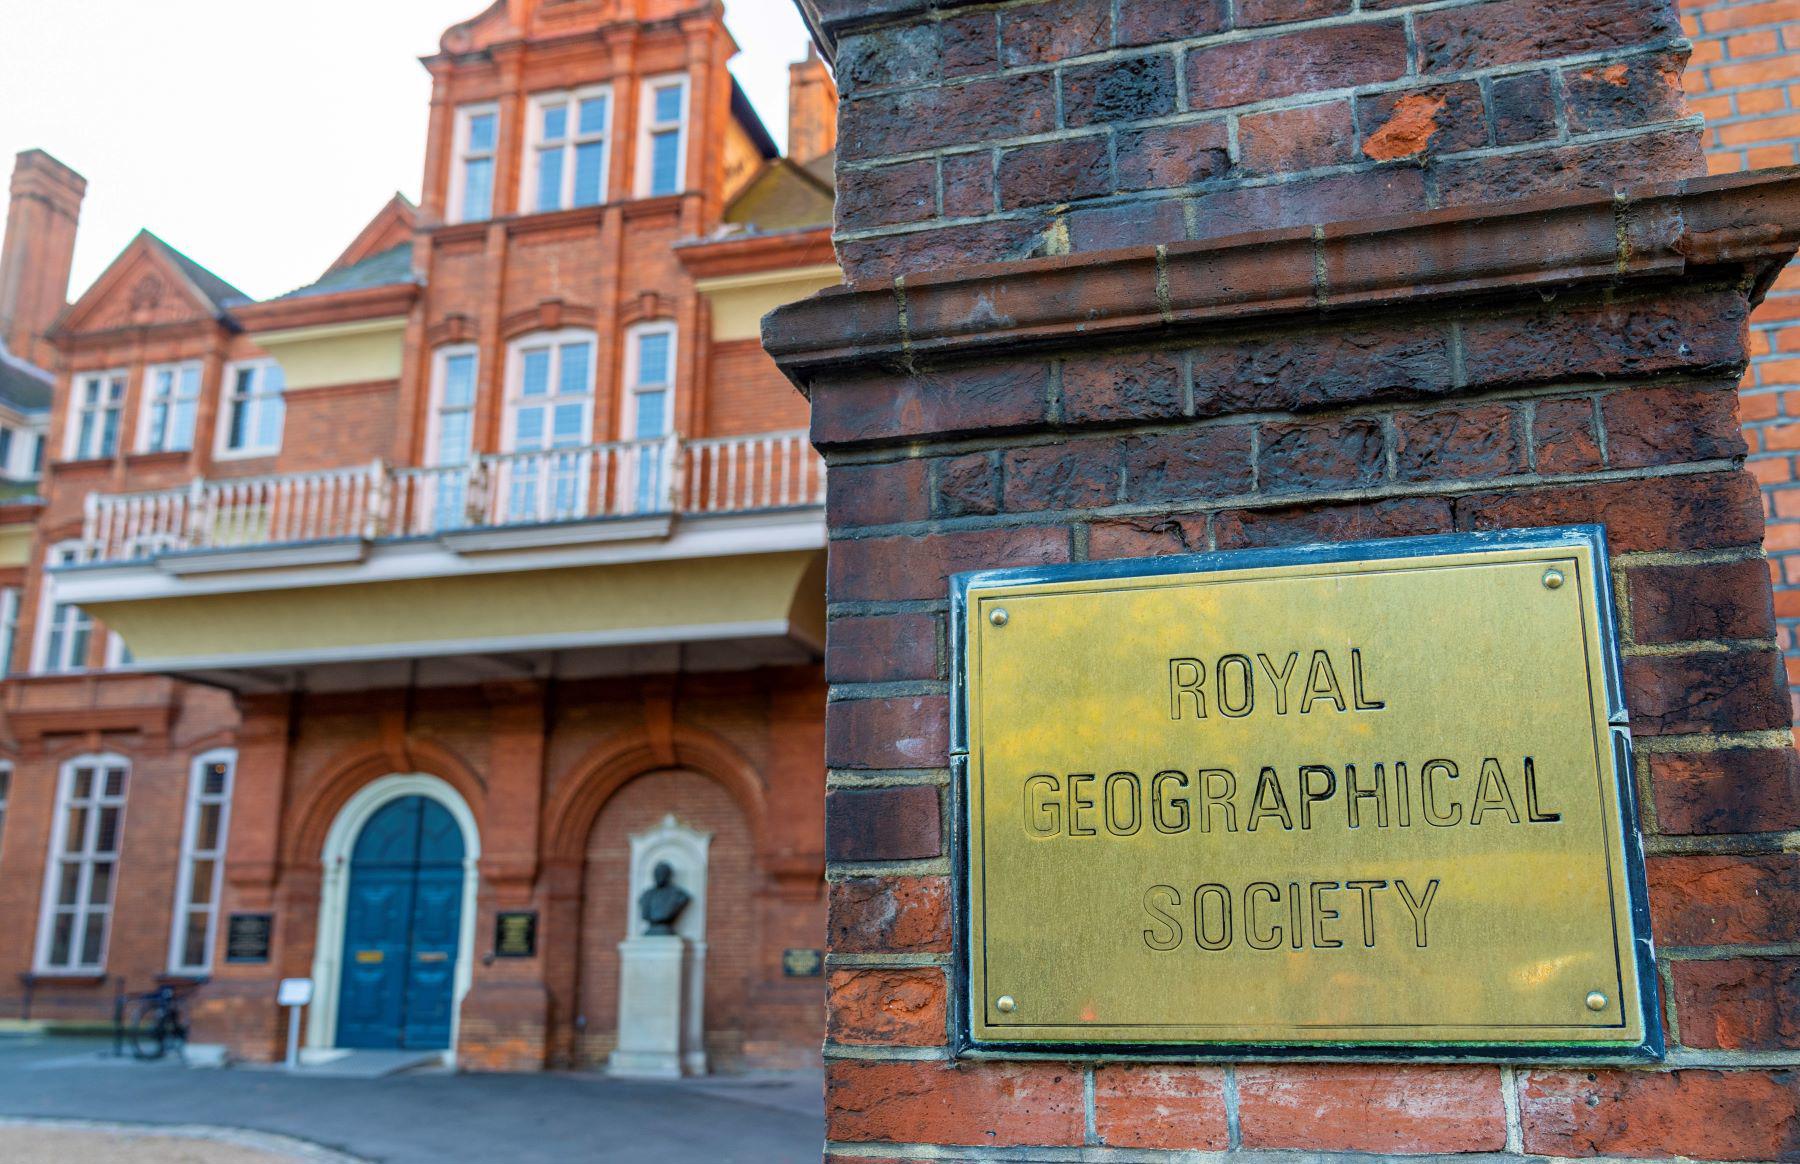 A picture of the Royal Geographical Society, with its plaque